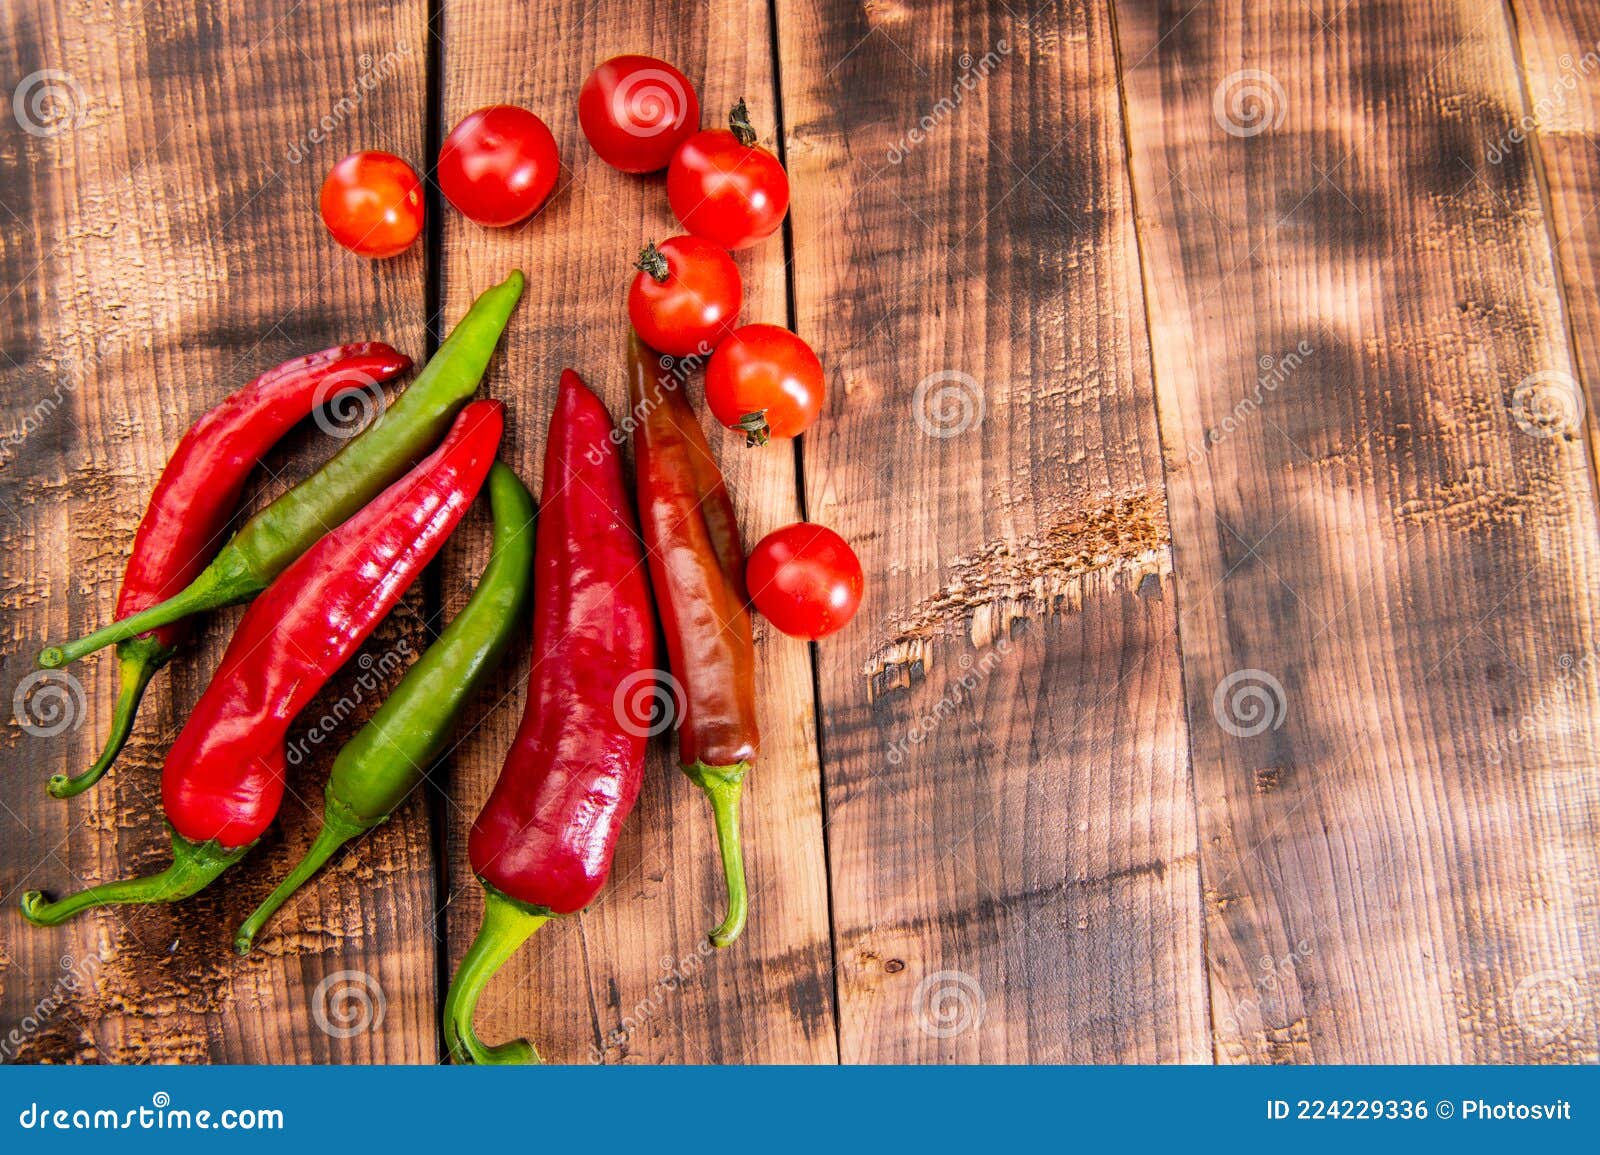 feel the piquancy. chili peppers and cherry tomatoes. red and green vegetables. organic vegetables